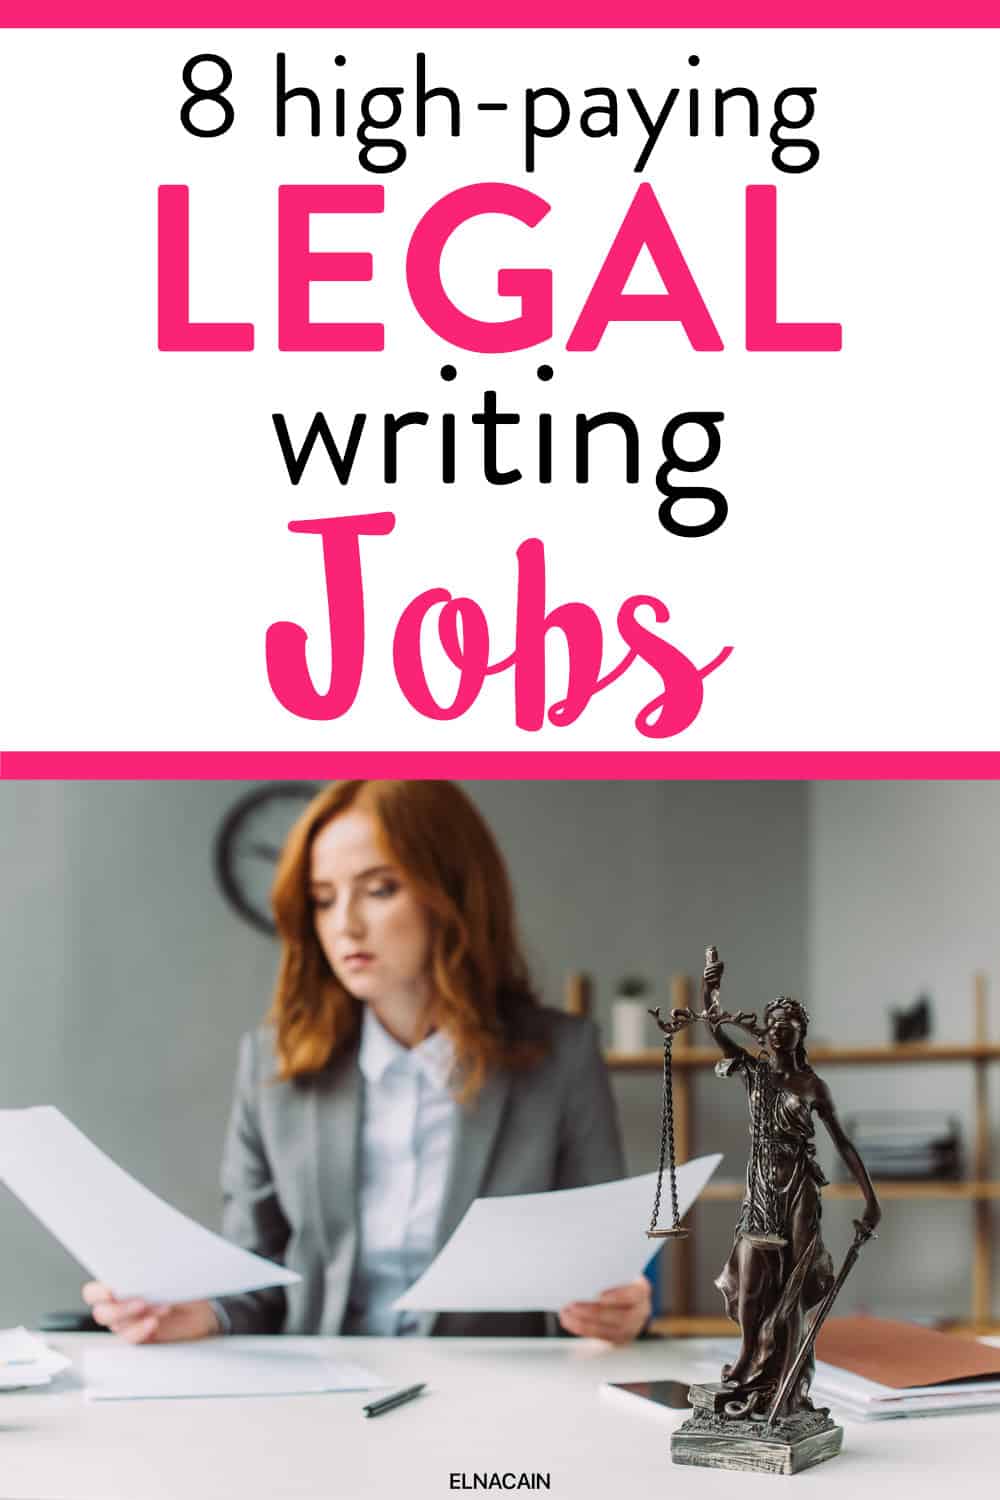 legal writing and research jobs